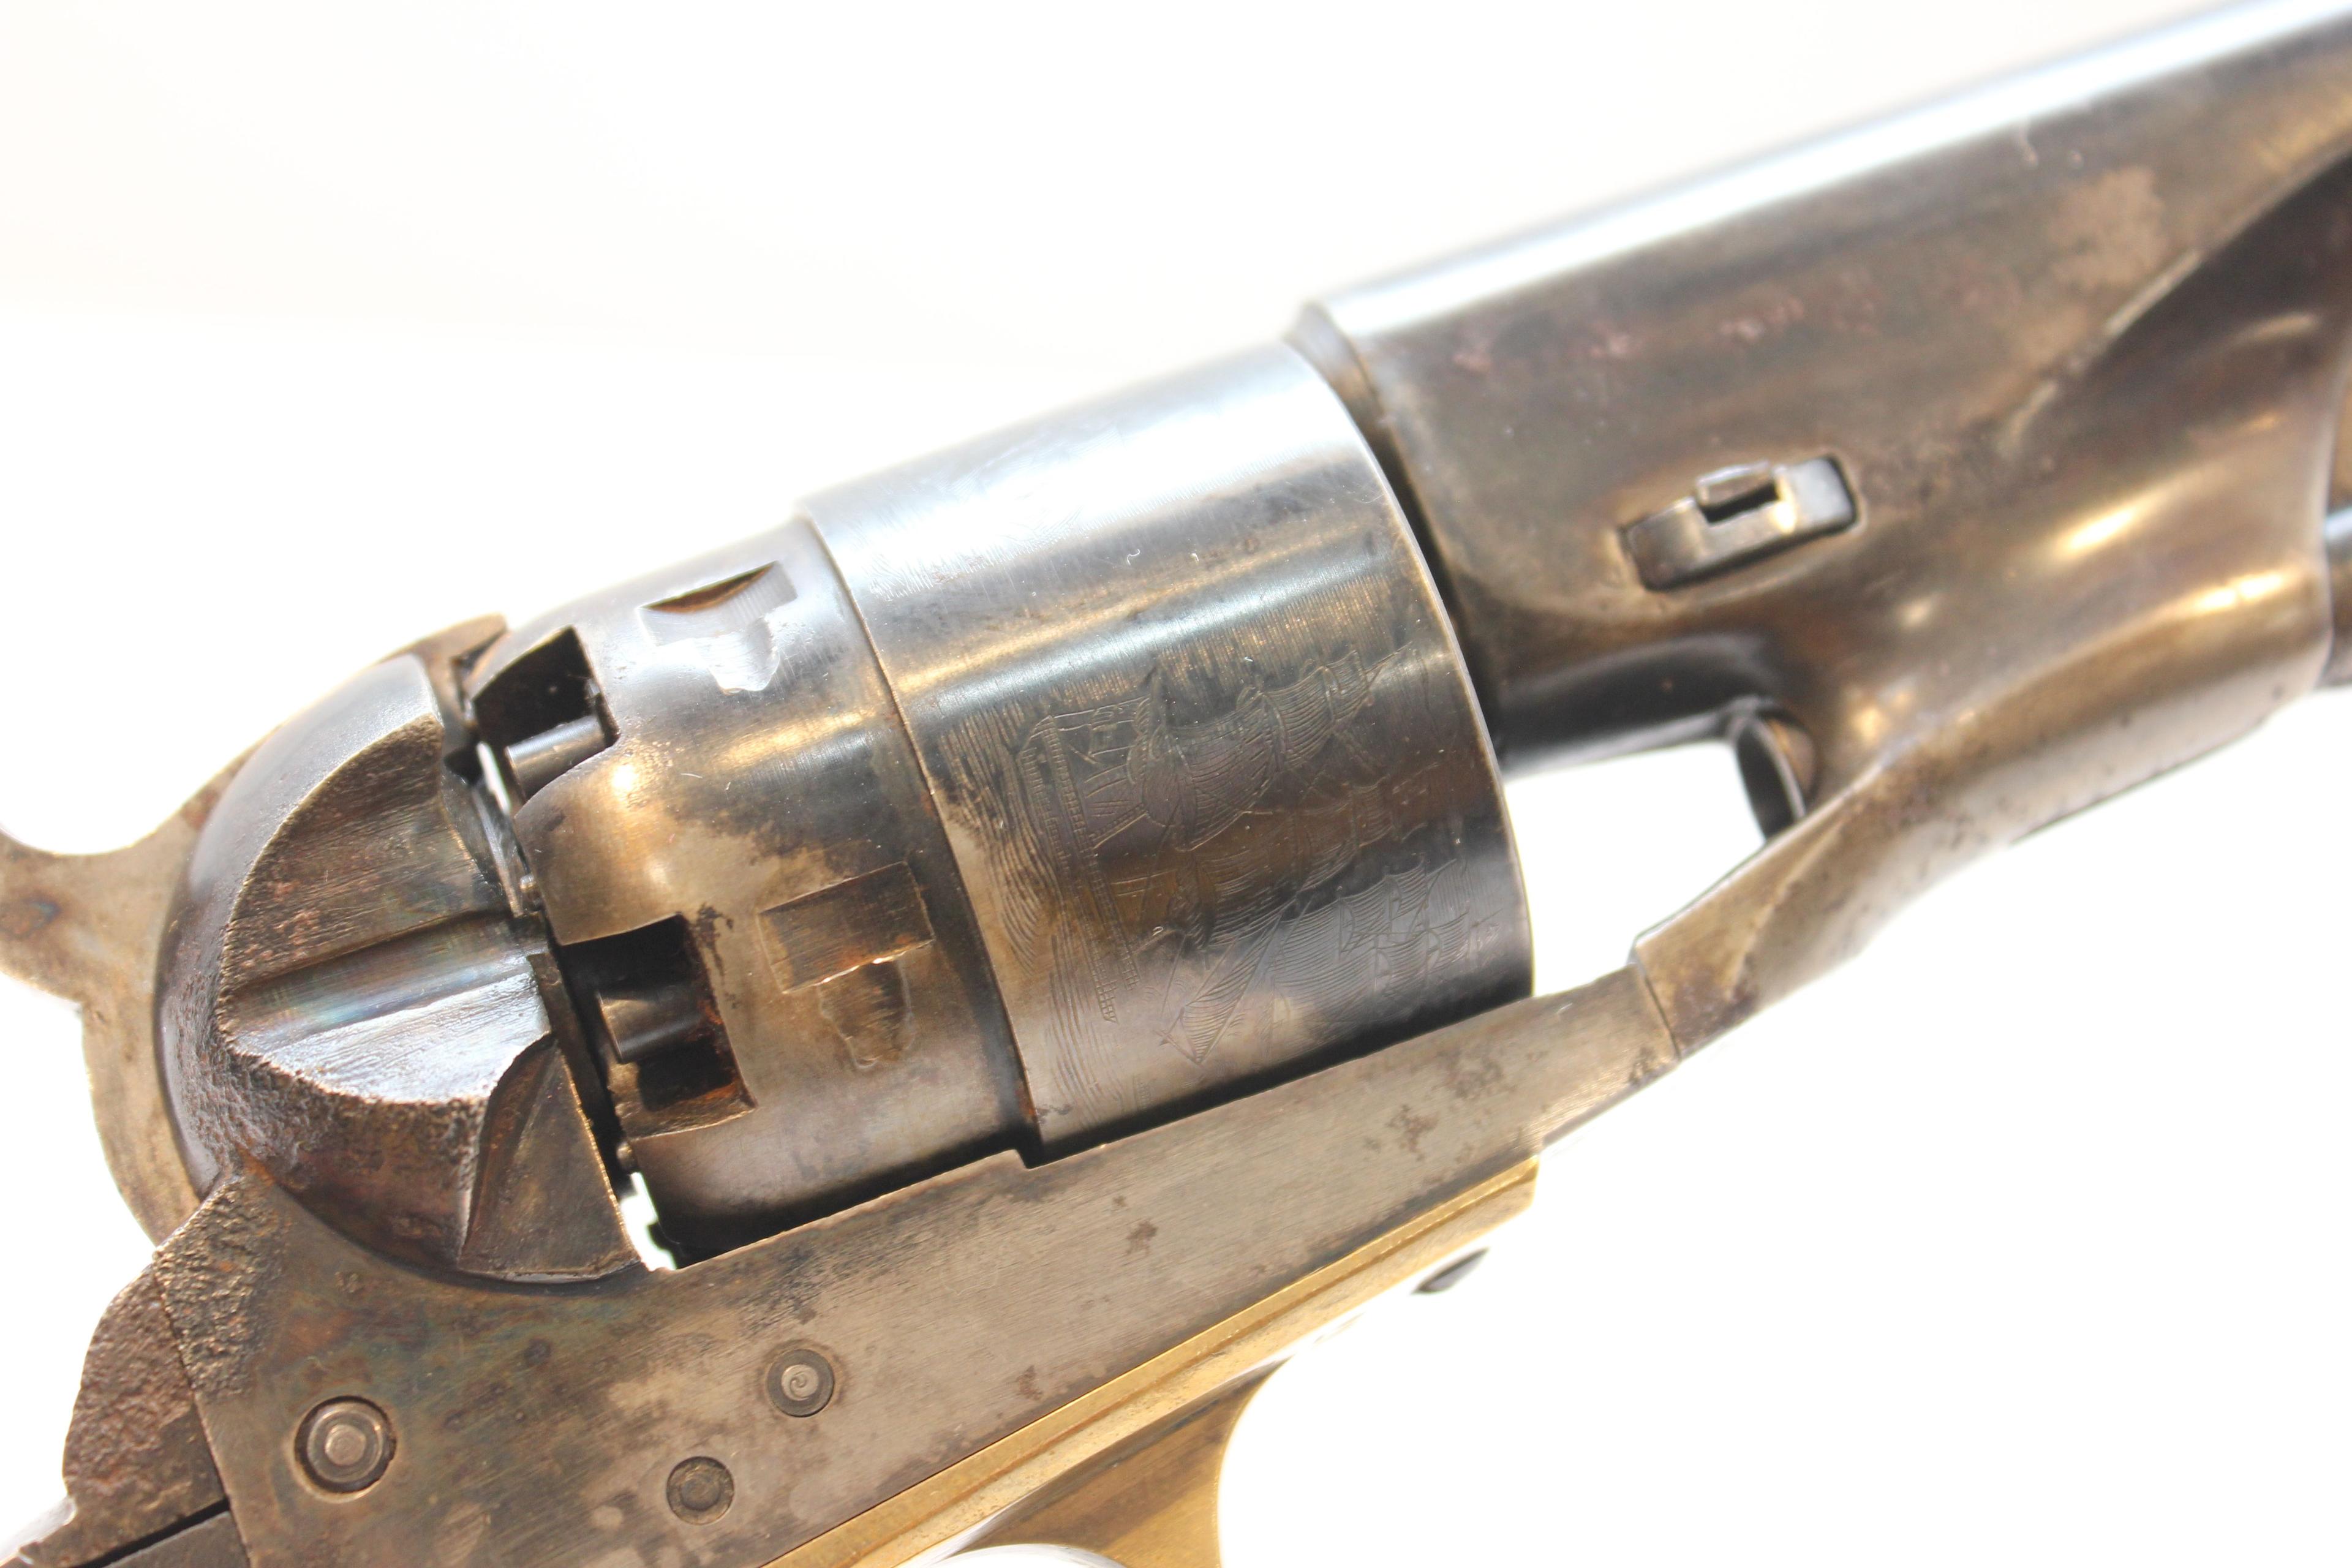 Unknown Mfr. Replica of Colt New Model Army 6-Shot Muzzle Loading Revolver w/8" Round BBL, Scrolled